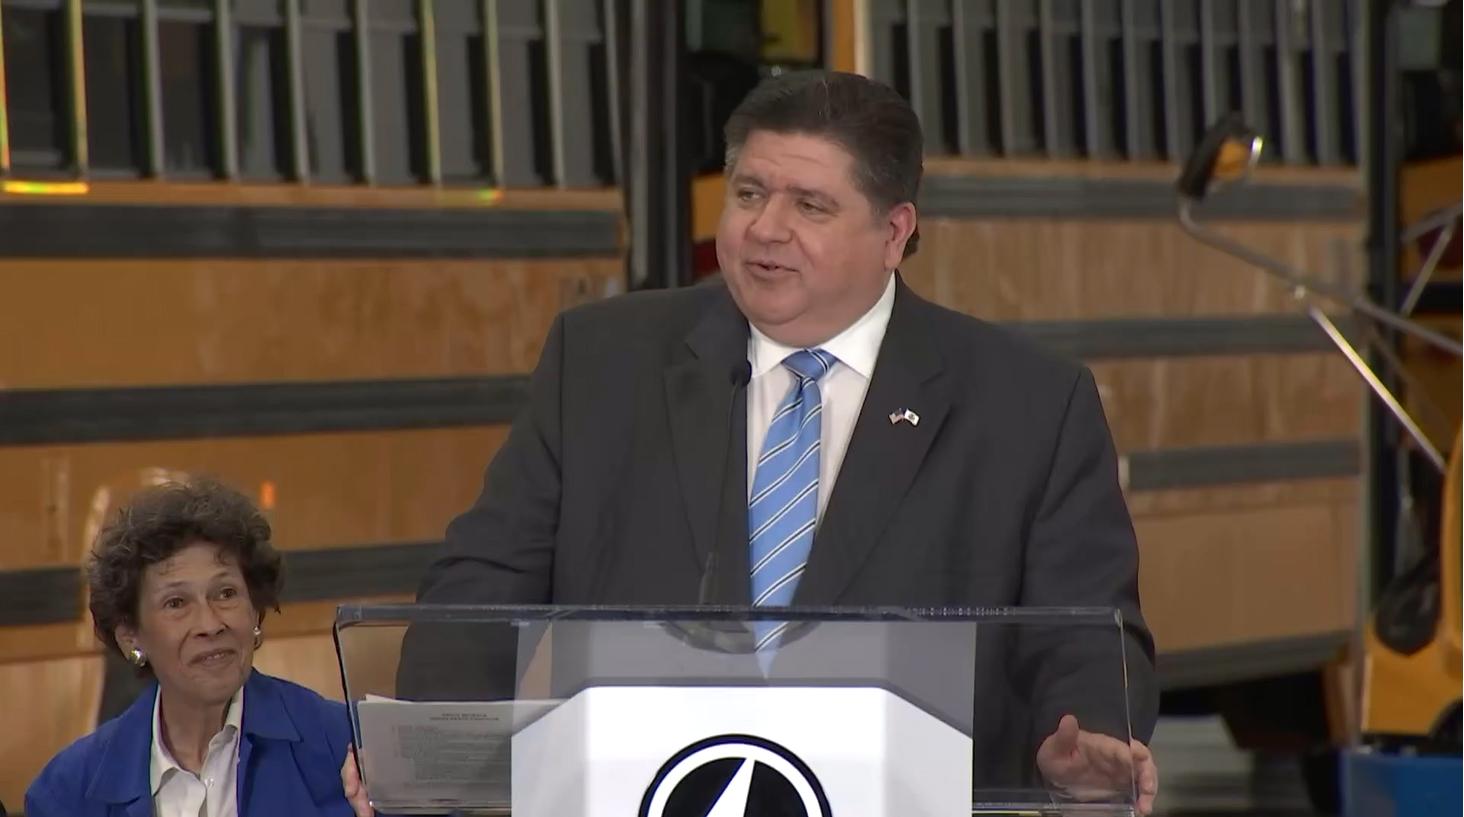 : Gov. JB Pritzker speaks at the grand opening of a new Lion Electric assembly plant in Will County. The Canada-based company specializes in medium- and heavy-duty electric vehicles, including electric school buses. (Credit: Illinois.gov)